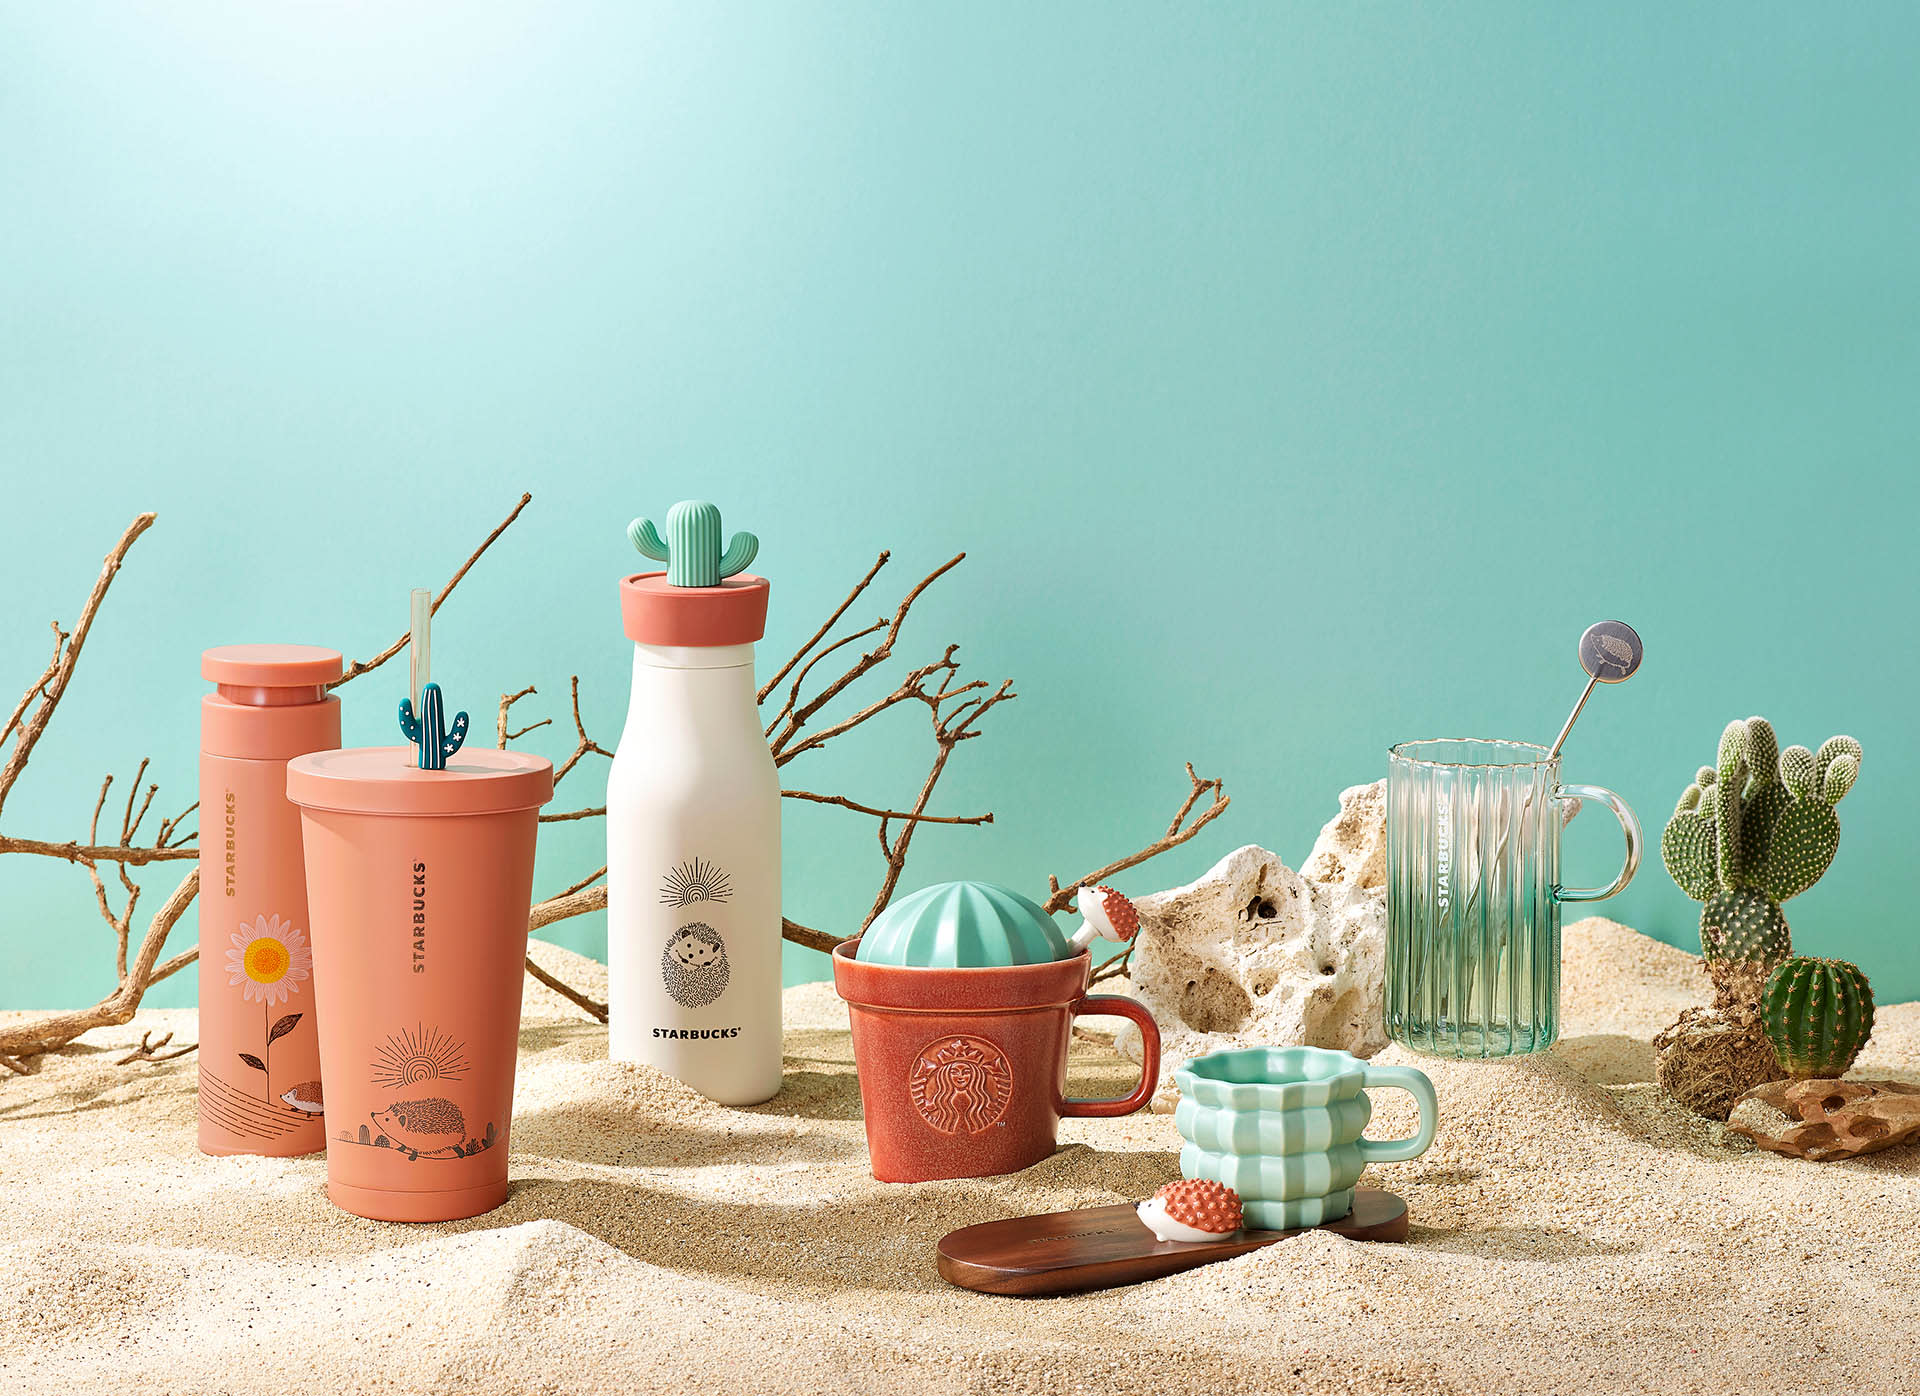 Starbucks’ New Desert-Themed Collection Features Cute Cactus Pots & Hedgehog Cups That’ll Keep You Reaching For That Beverage All Day  